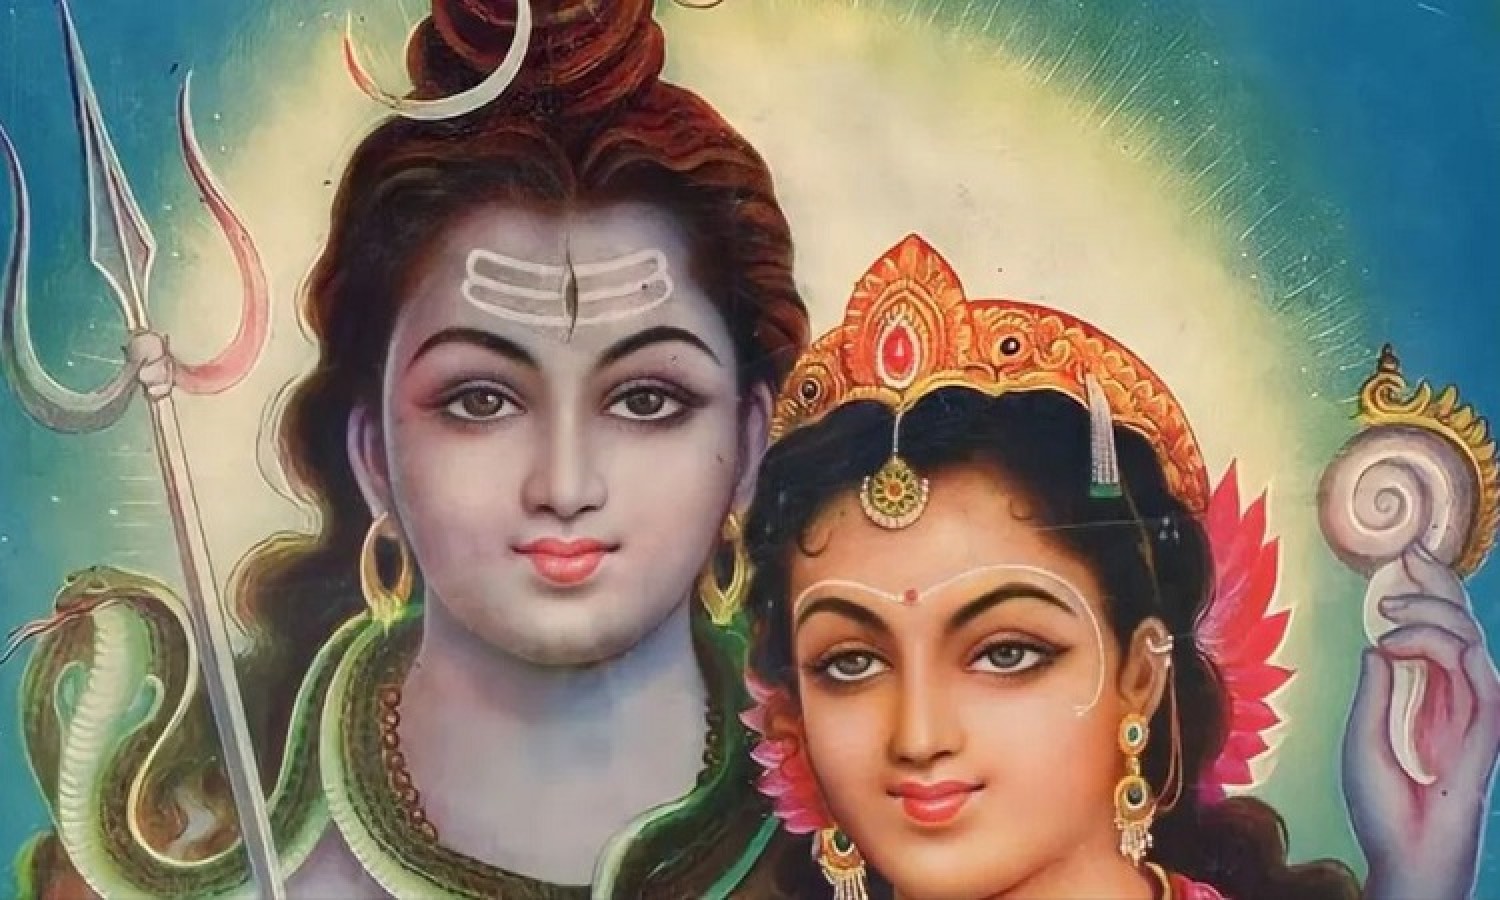 beautiful pictures of lord shiva and parvati